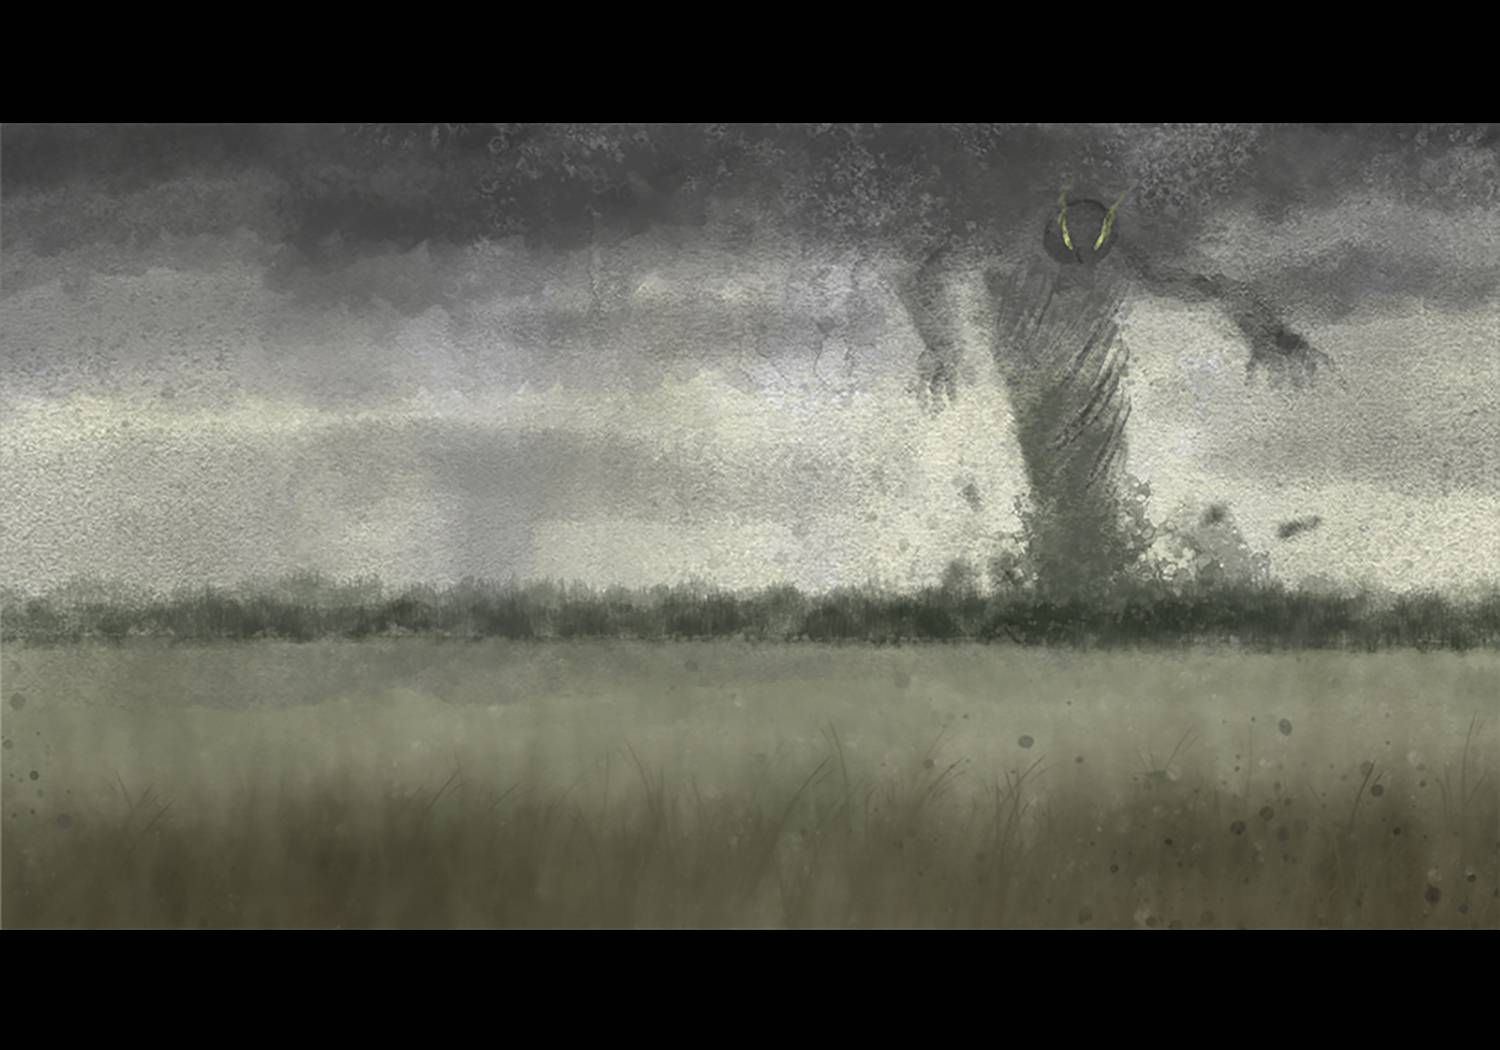 A tornado with eyes and arms approaches on a forested horizon.